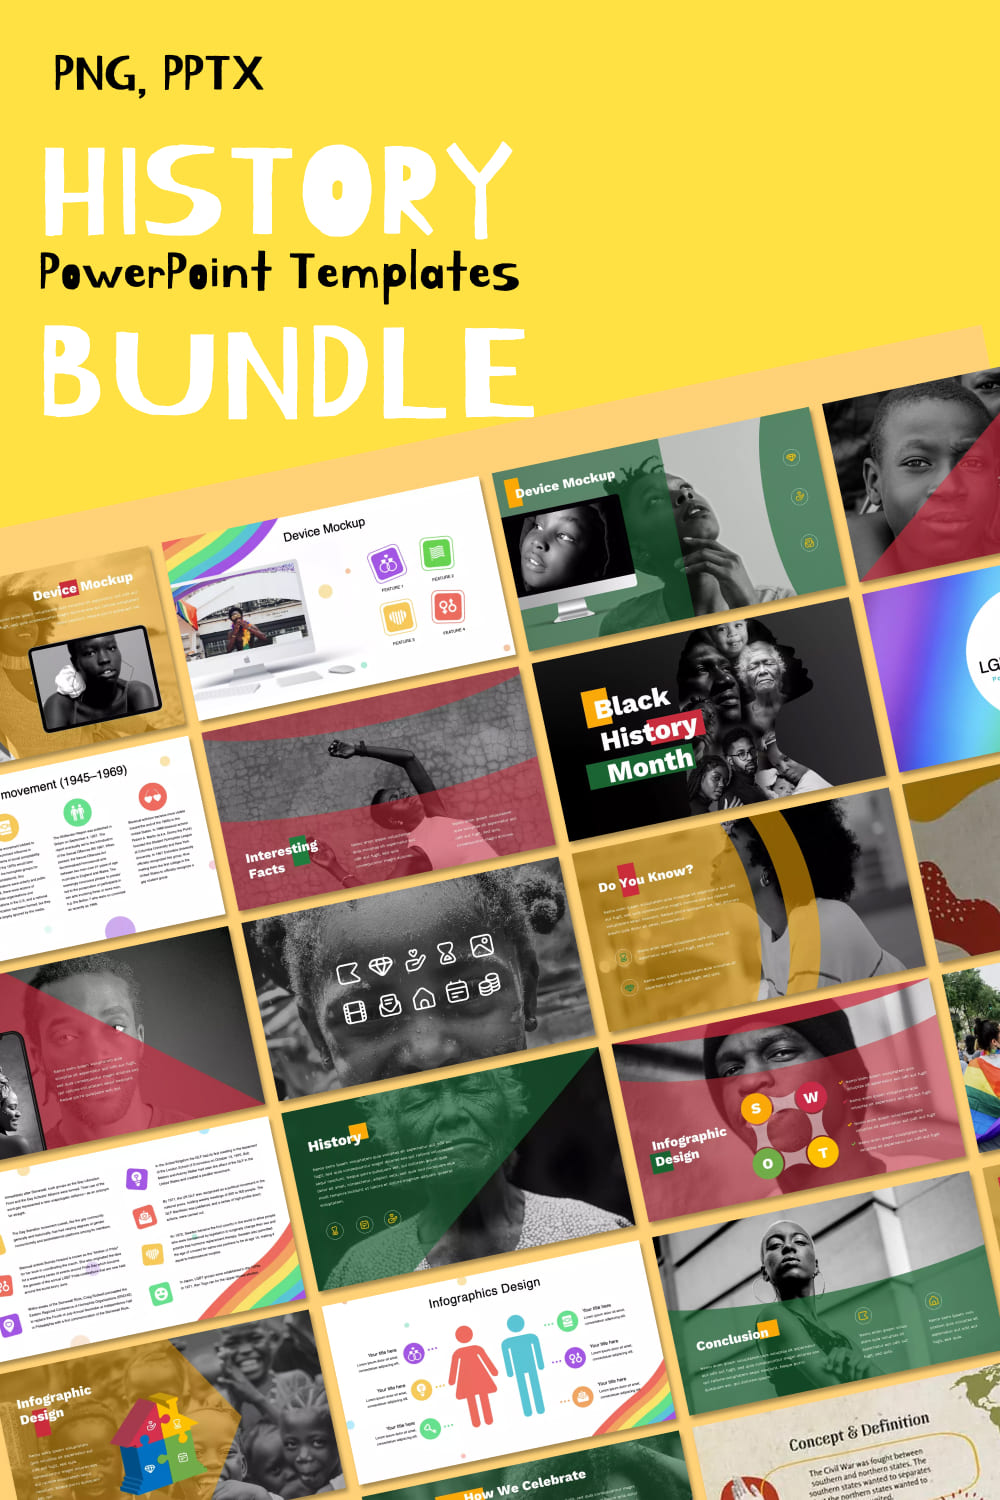 History powerpoint templates bundle images of pinterest.